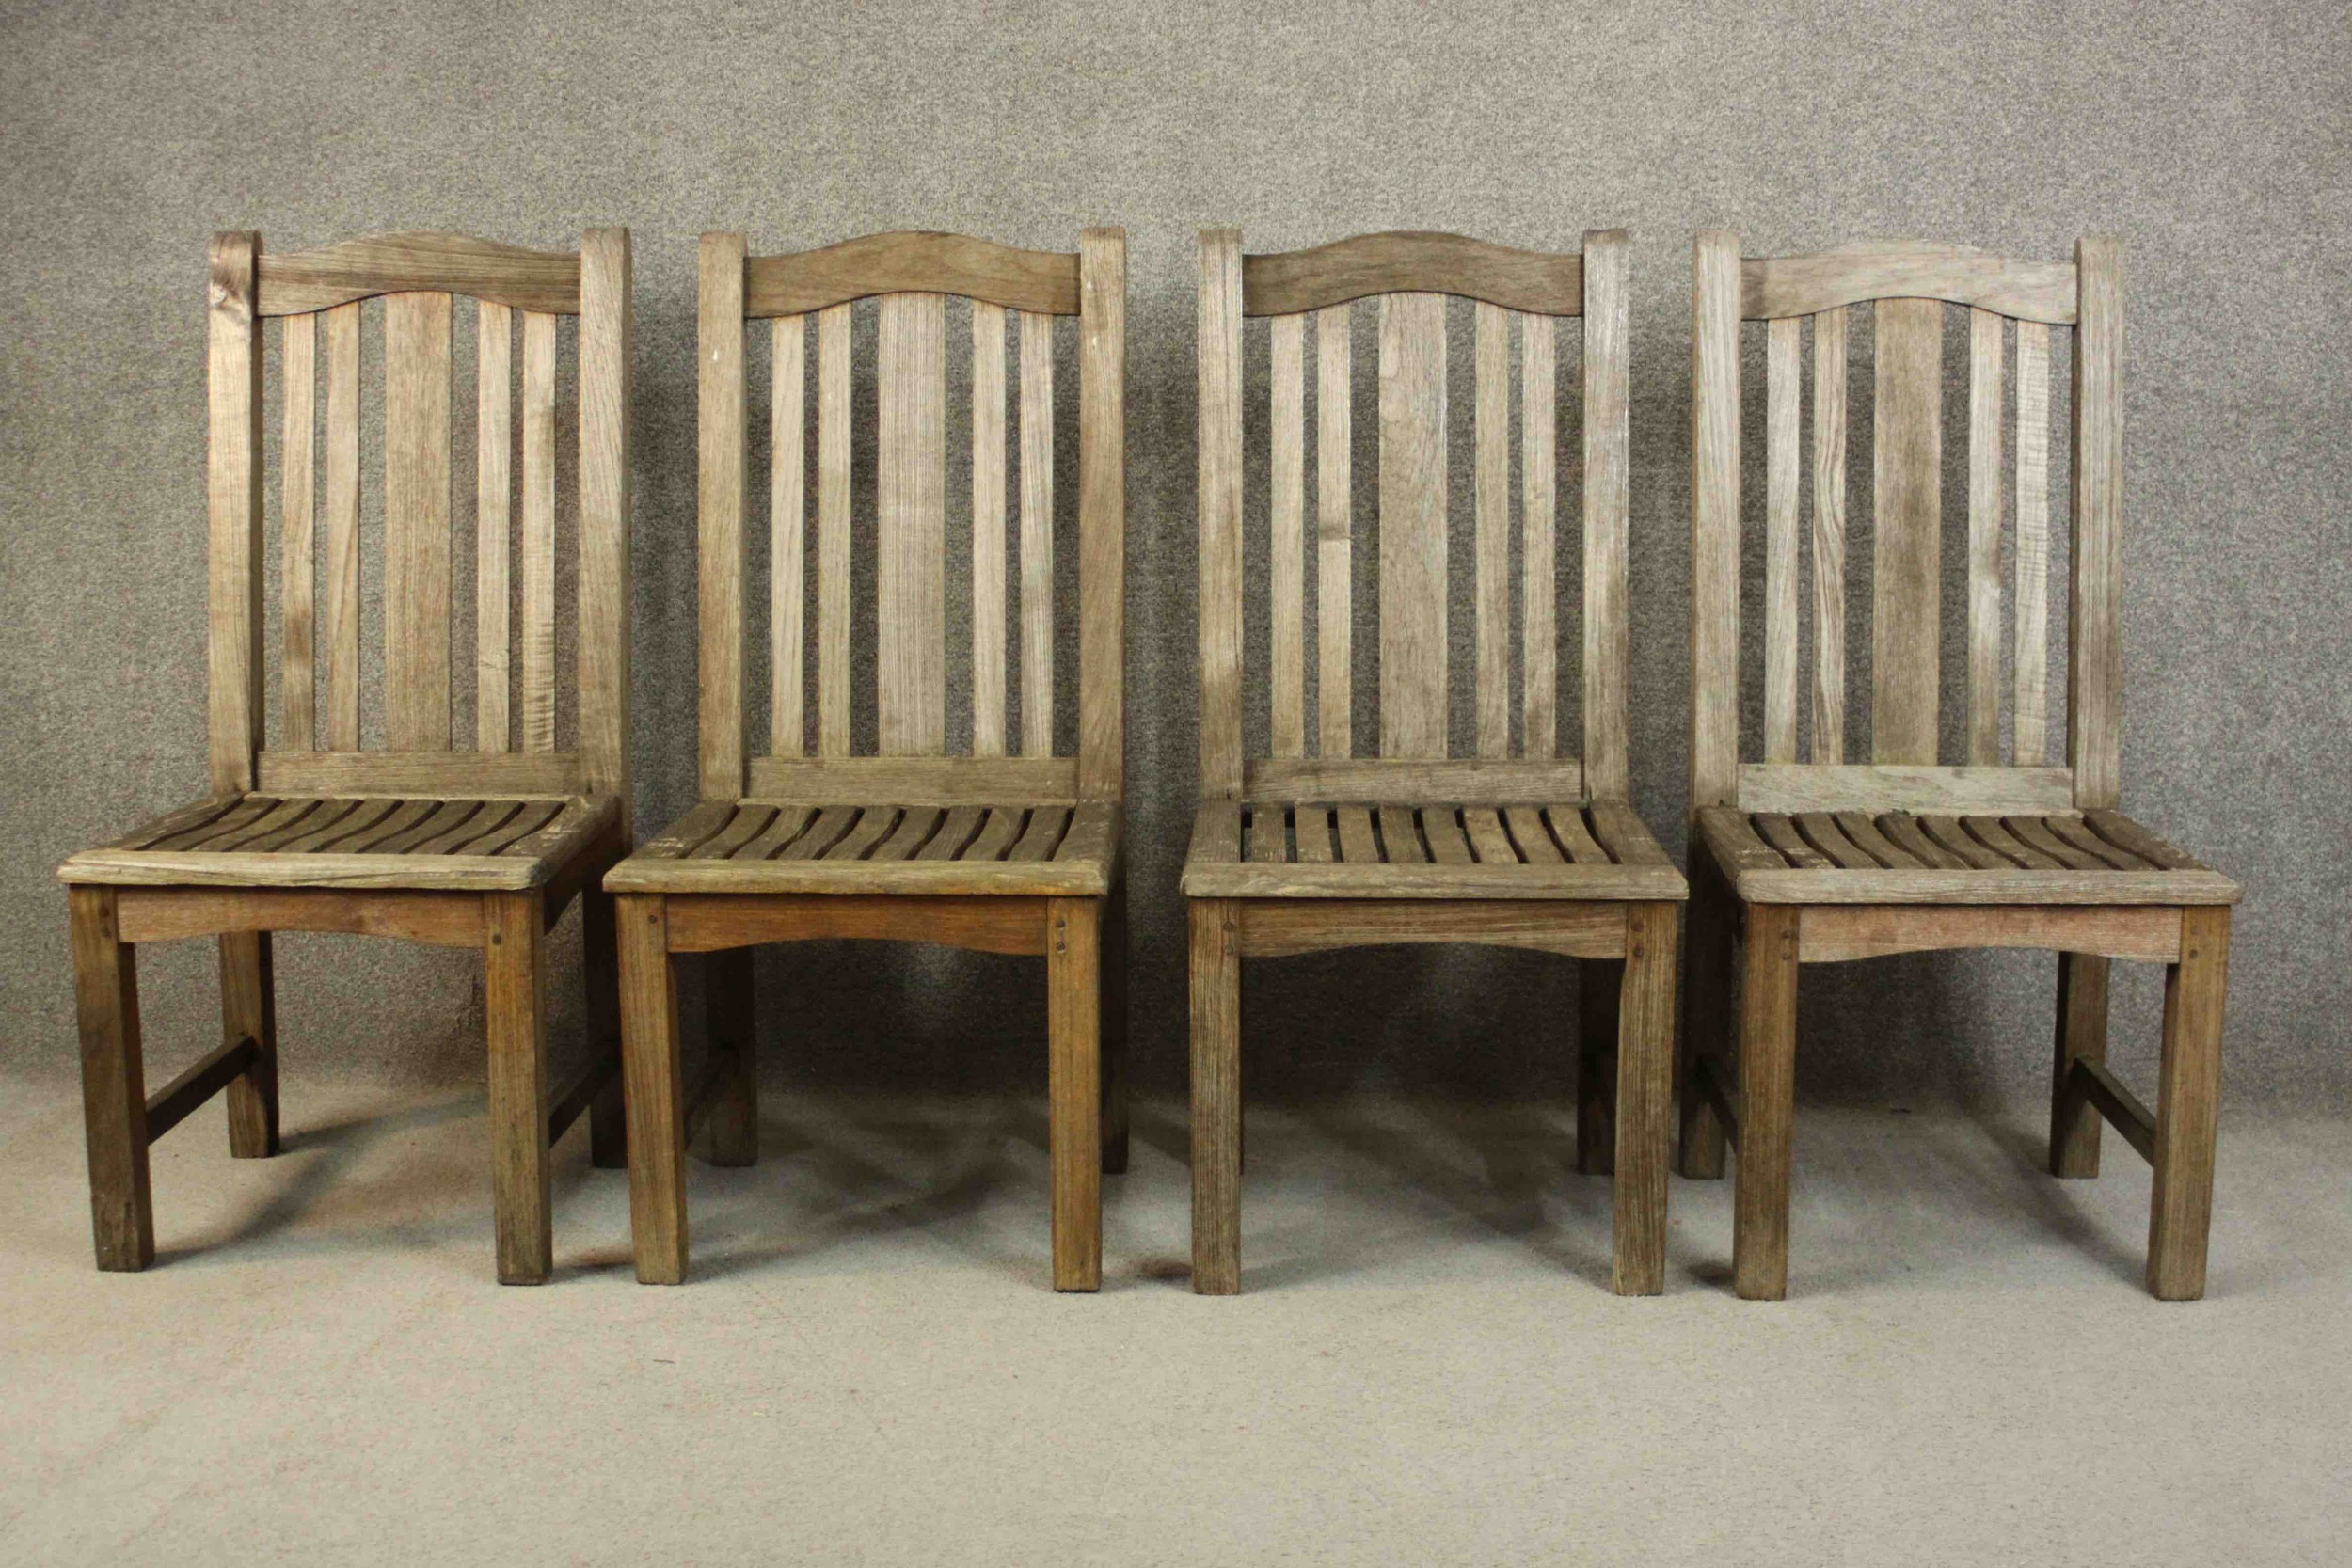 A set of four contemporary Barlow and Tyrie oak garden dining chairs, with slatted seats. - Image 3 of 9